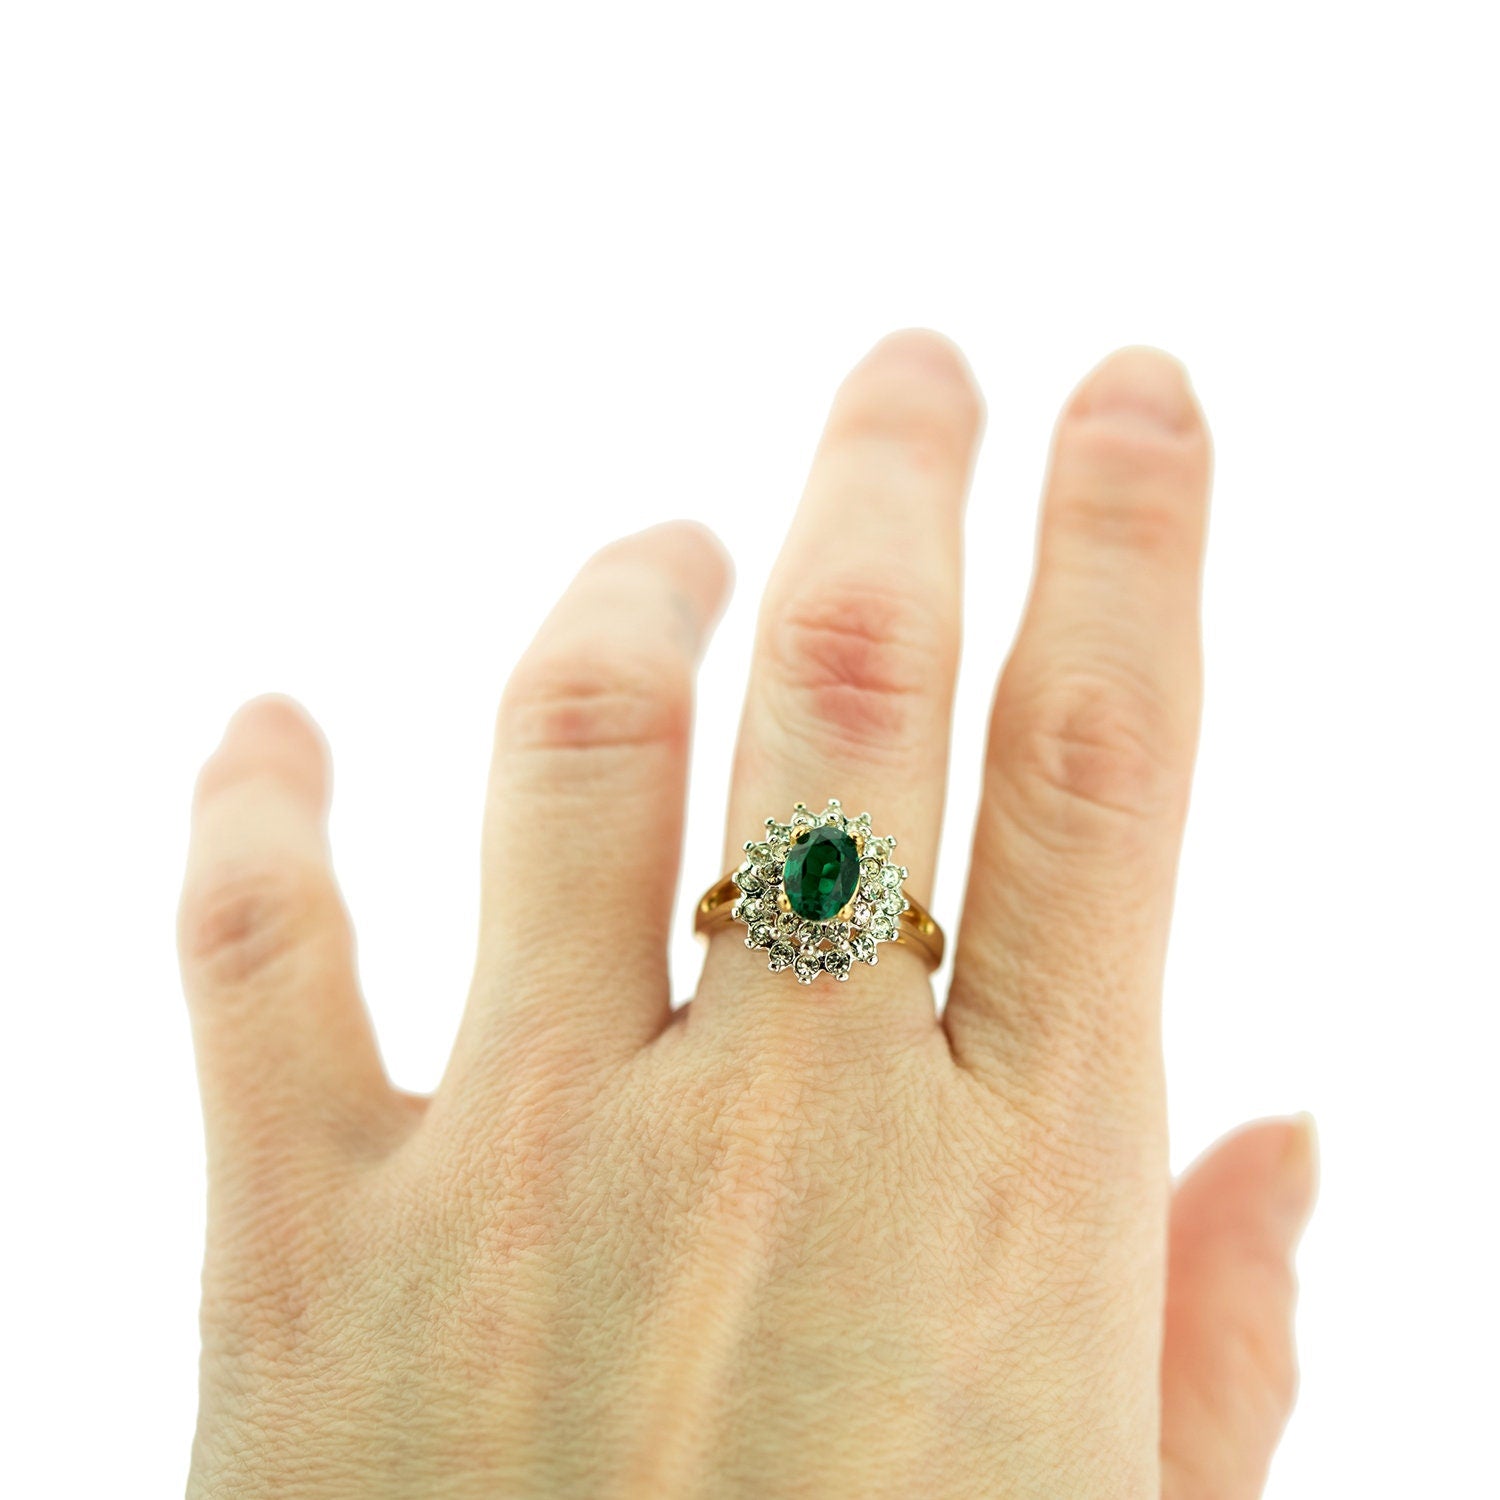 Vintage Ring Emerald and Clear Swarovski Crystals 18k Gold Antique Womans Jewelry Rings Emerald Size #R1352-EWY - Limited Stock - Never Worn